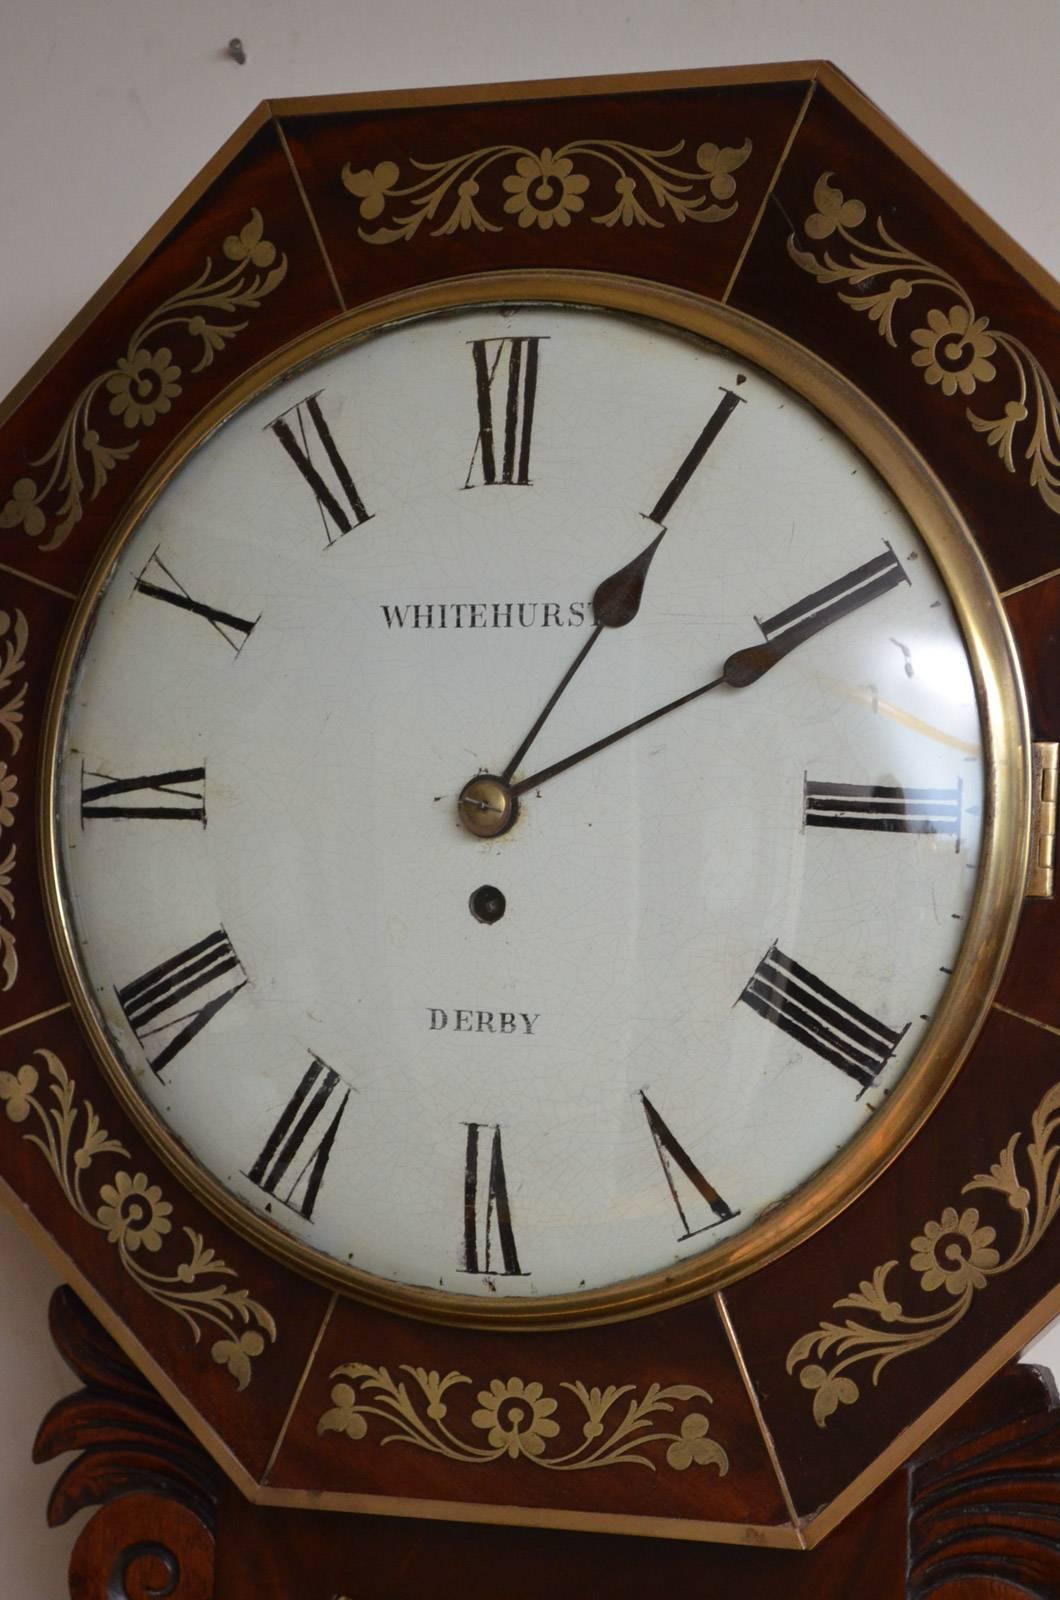 Sn3122, fine quality, Regency, mahogany wall clock by Whitehurst of Derby, having original painted dial with Roman numerals, original hands and convex glass with brass bezel, in octagonal, mahogany, brass inlaid case with carved 'ears' below, circa